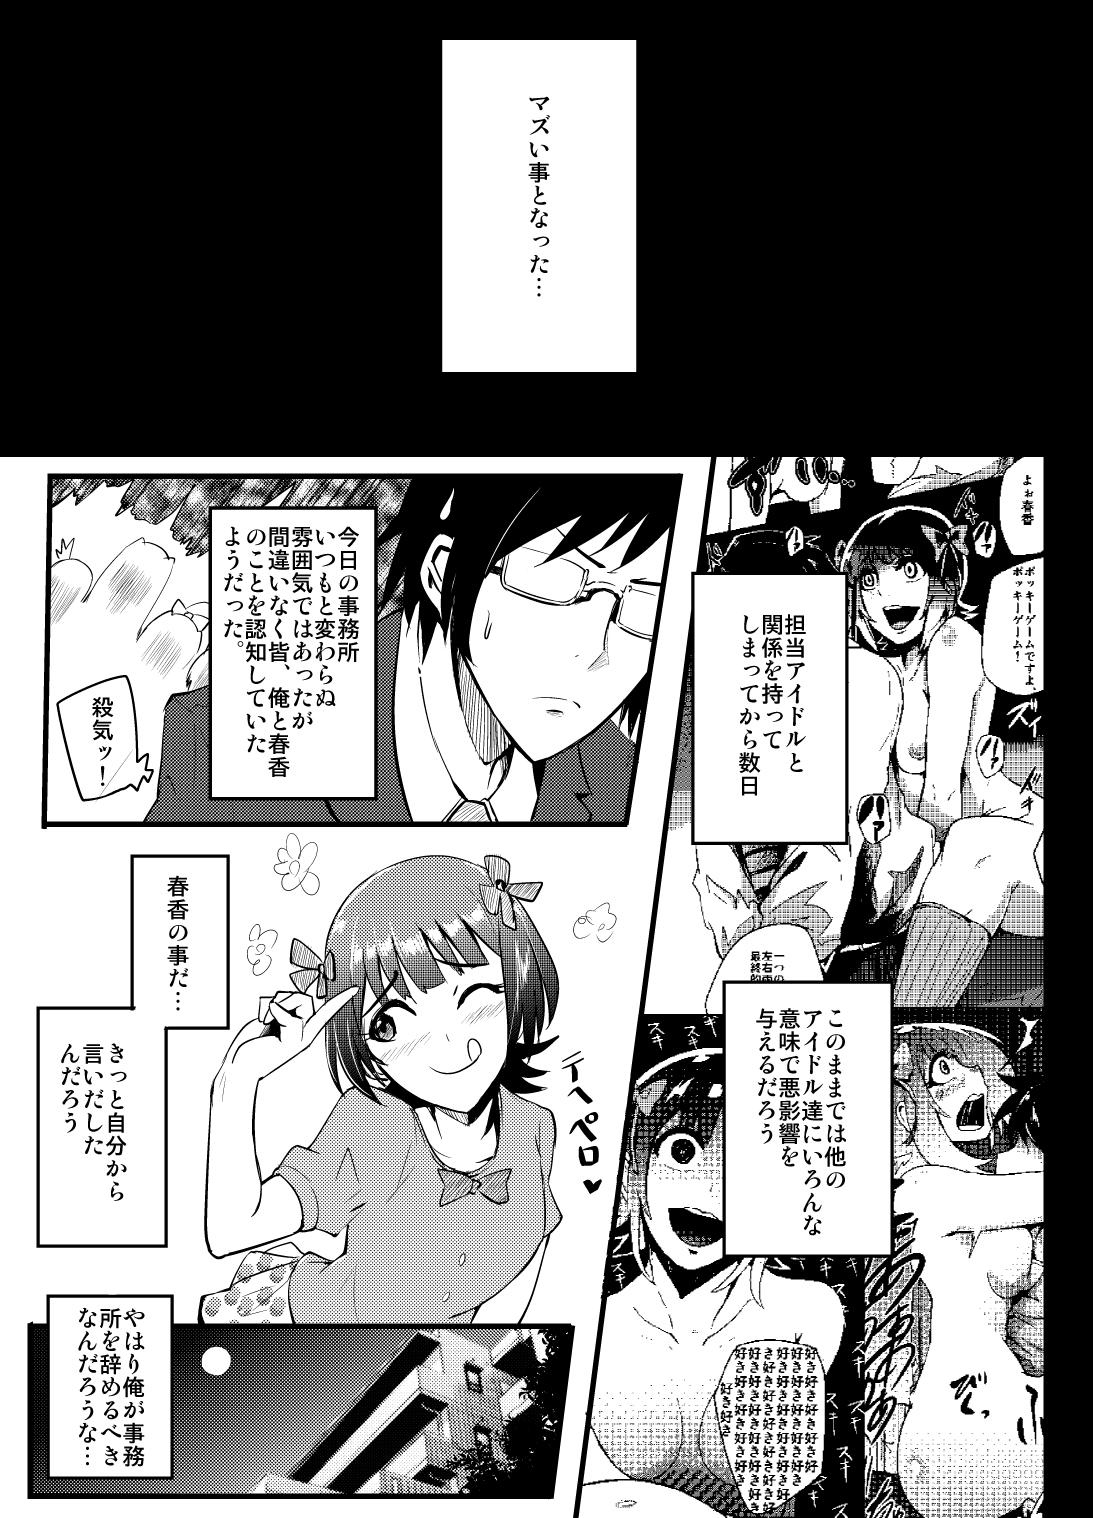 Indoor THEYANDEREM@STER - The idolmaster Celebrity Sex Scene - Page 2